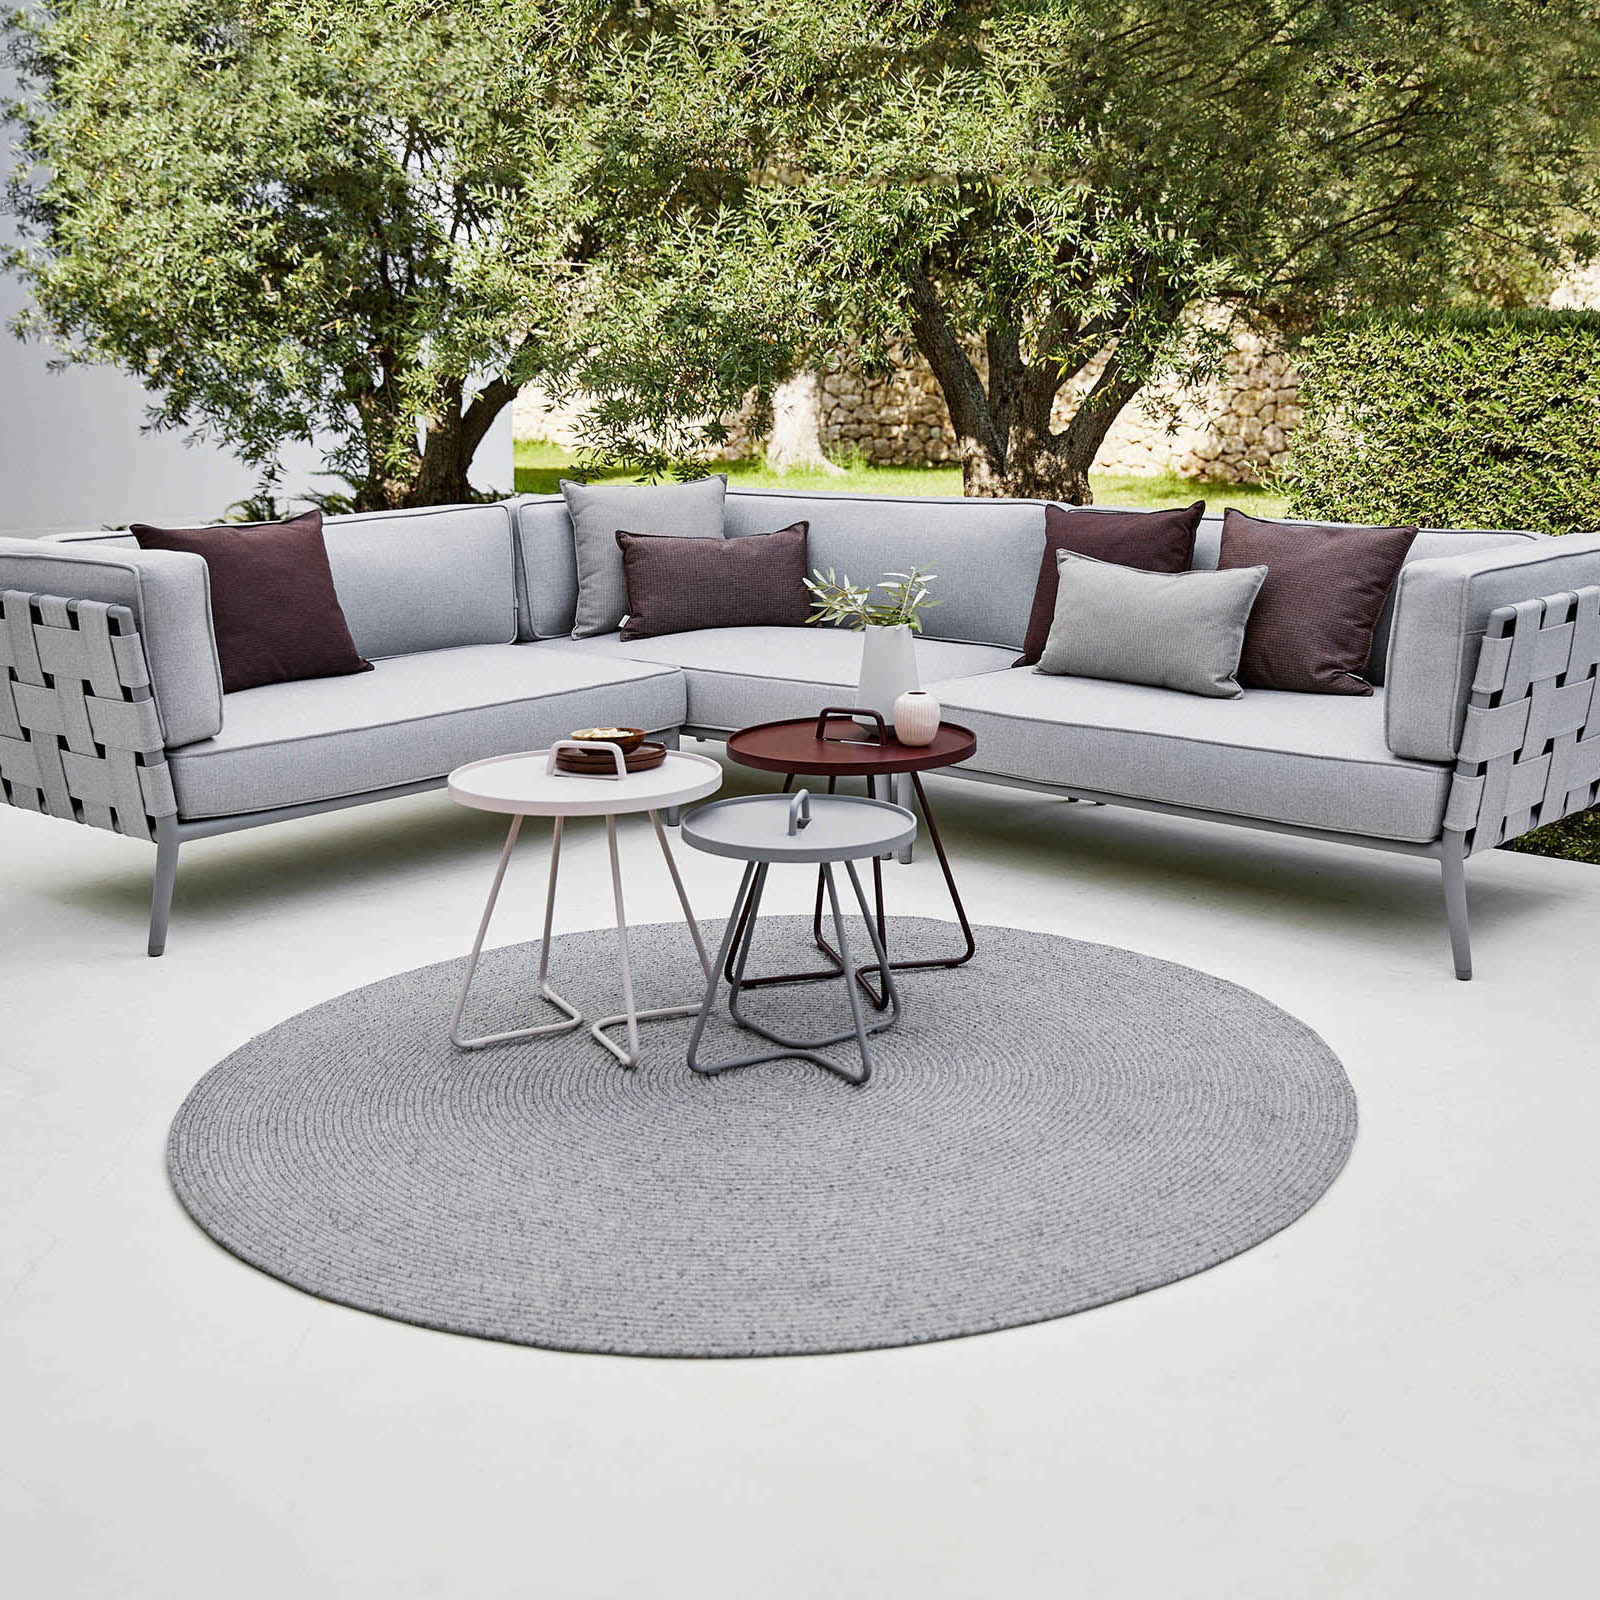 Conic 2-Sitzer Sofa-Modul links aus Cane-line AirTouch mit QuickDry in Light Grey